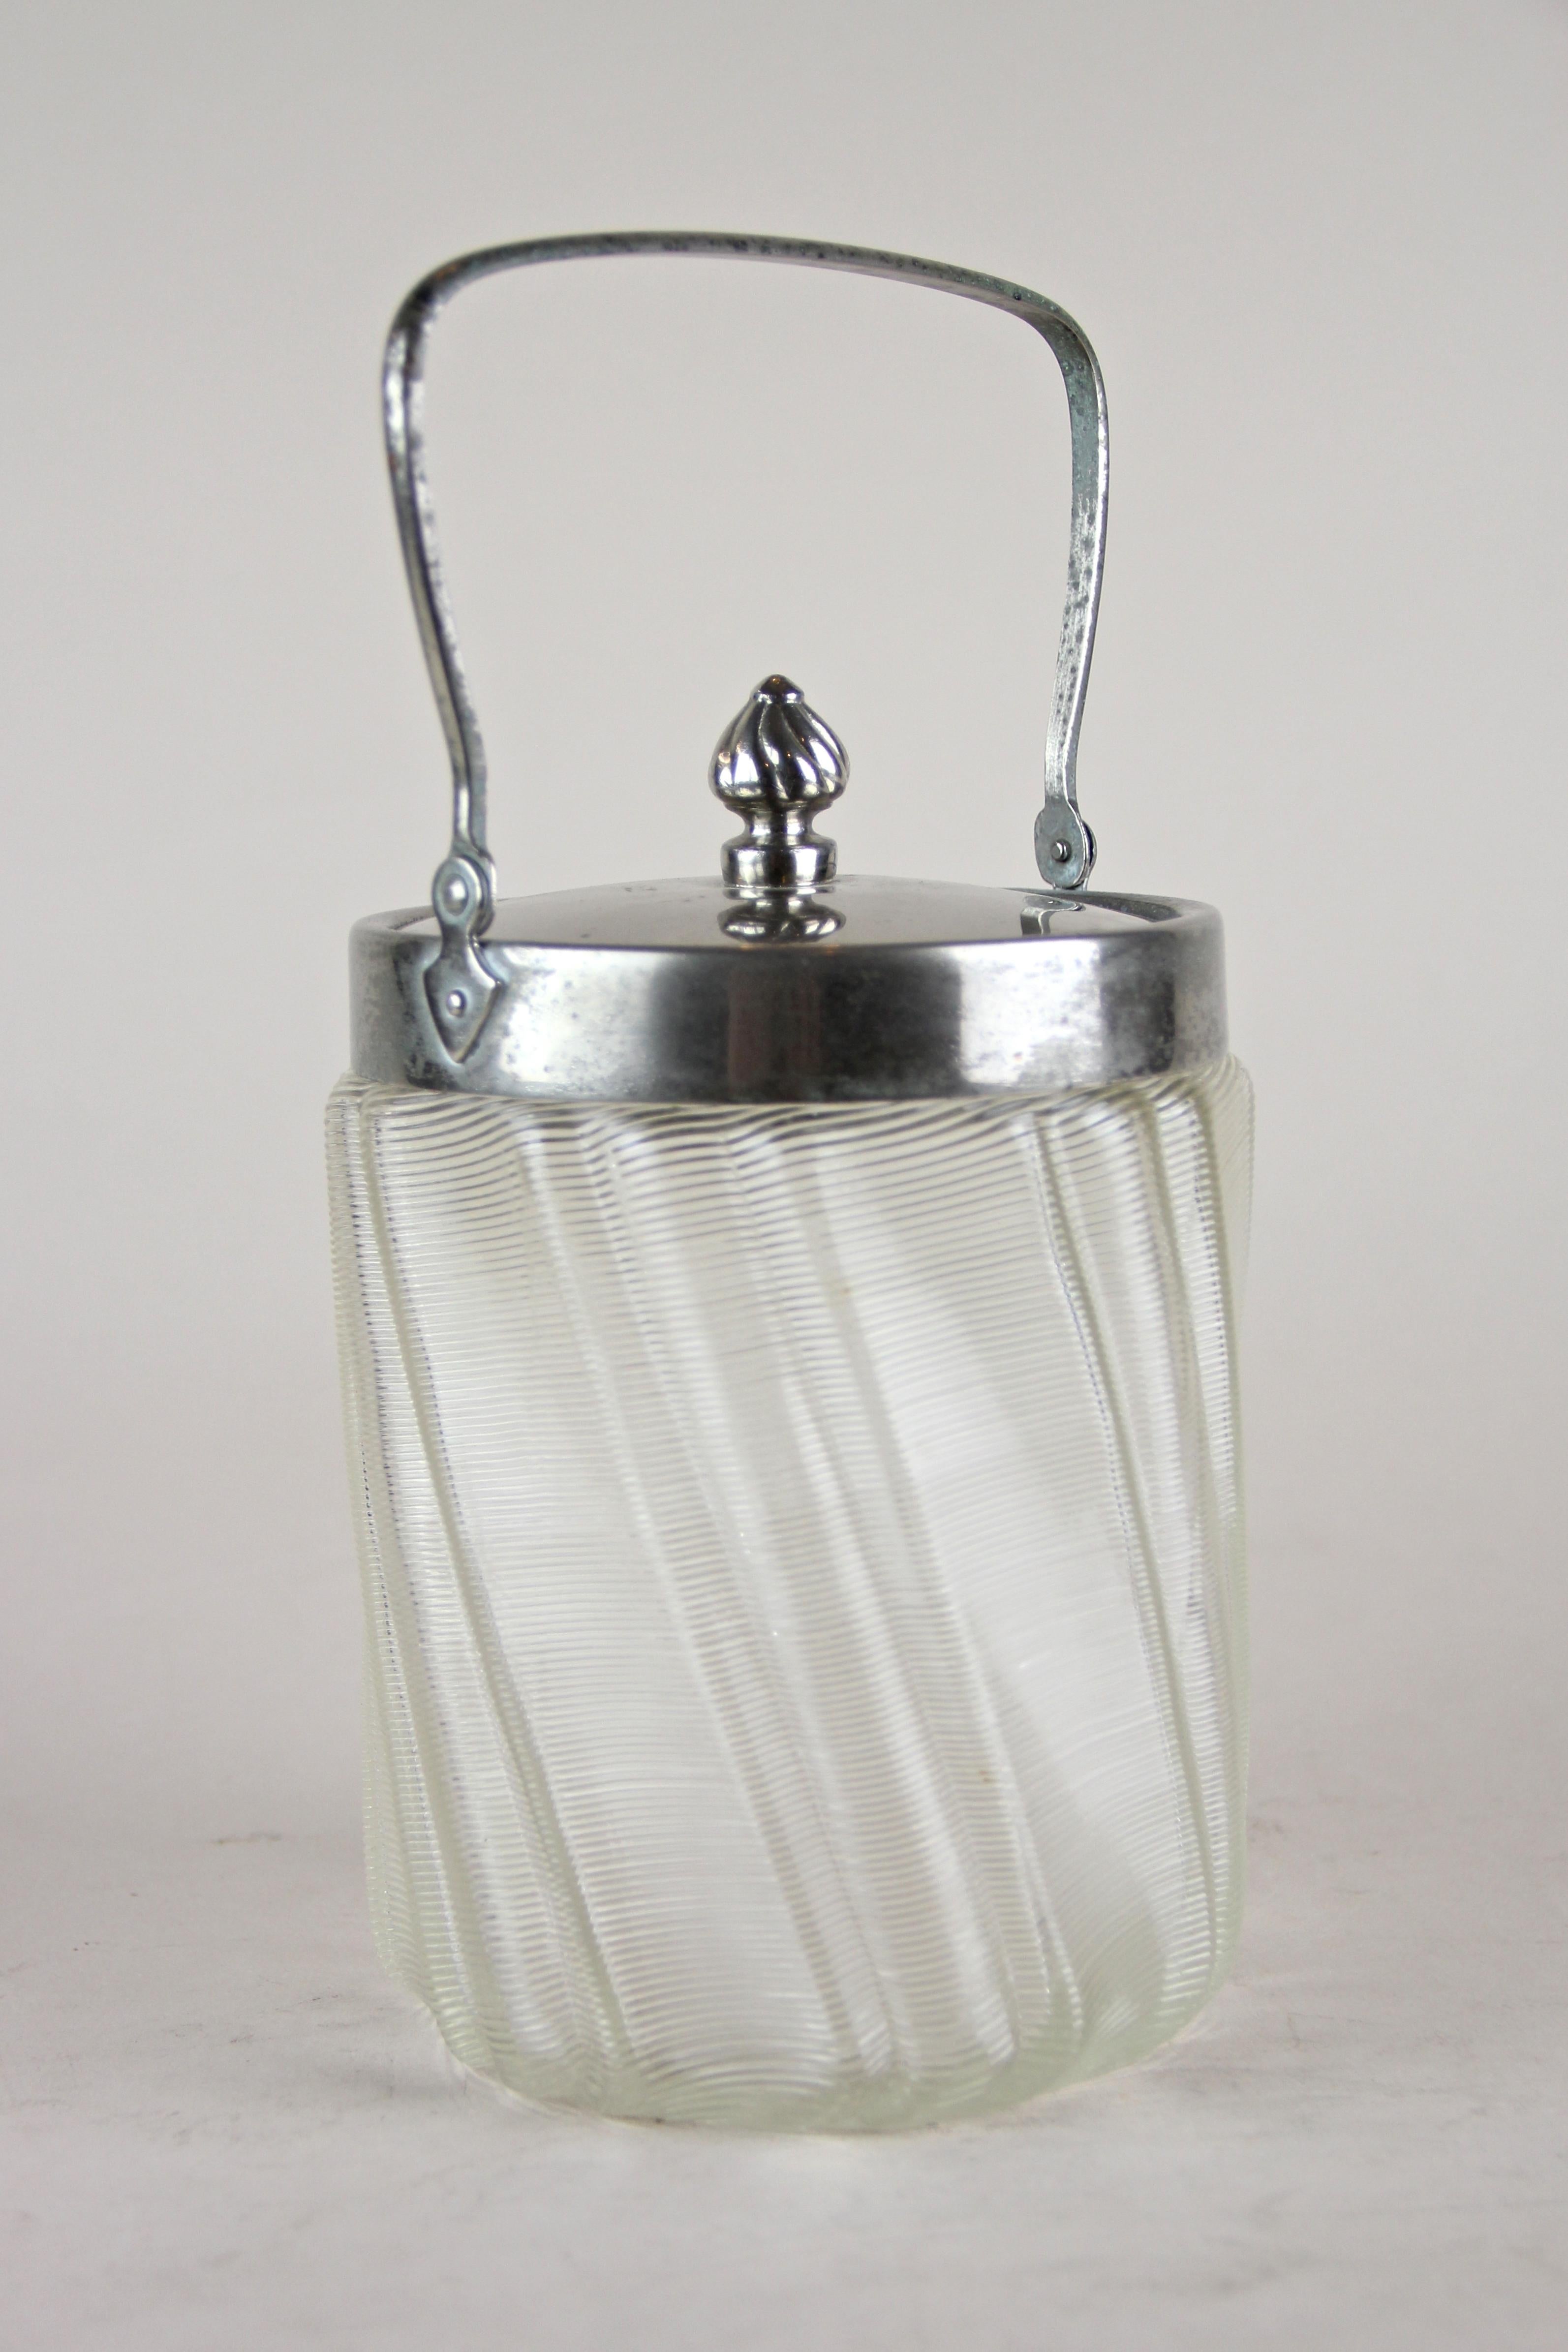 Lovely glass jar with chromed lid from the early 20th century out of Austria. The beautiful shaped glass body looks like it has been twisted and shows an artful surface with glass threads. The removable chrome lid with a nice little cone on it keeps